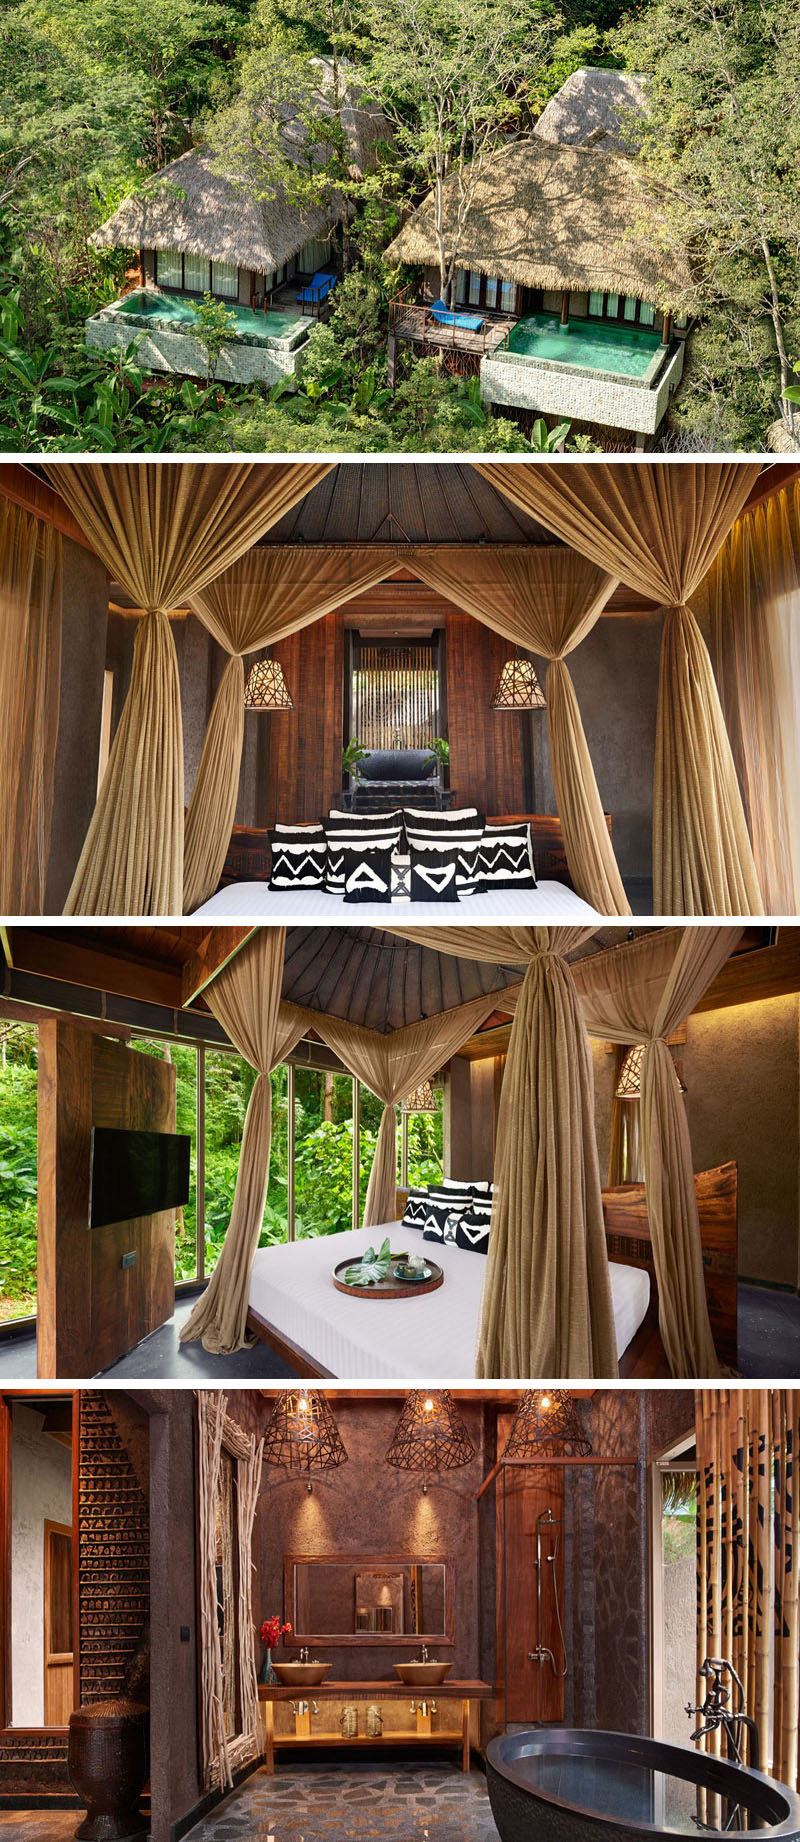 Travel Idea - The Clay Pool Cottages at Keemala (resort in Thailand) were inspired by the Pa-Ta-Pea clan who valued nature and the earth above all else. This was incorporated into the design by making the walls of these cottages from clay and dirt and including other natural materials, like wood and stone, into the interior as well.